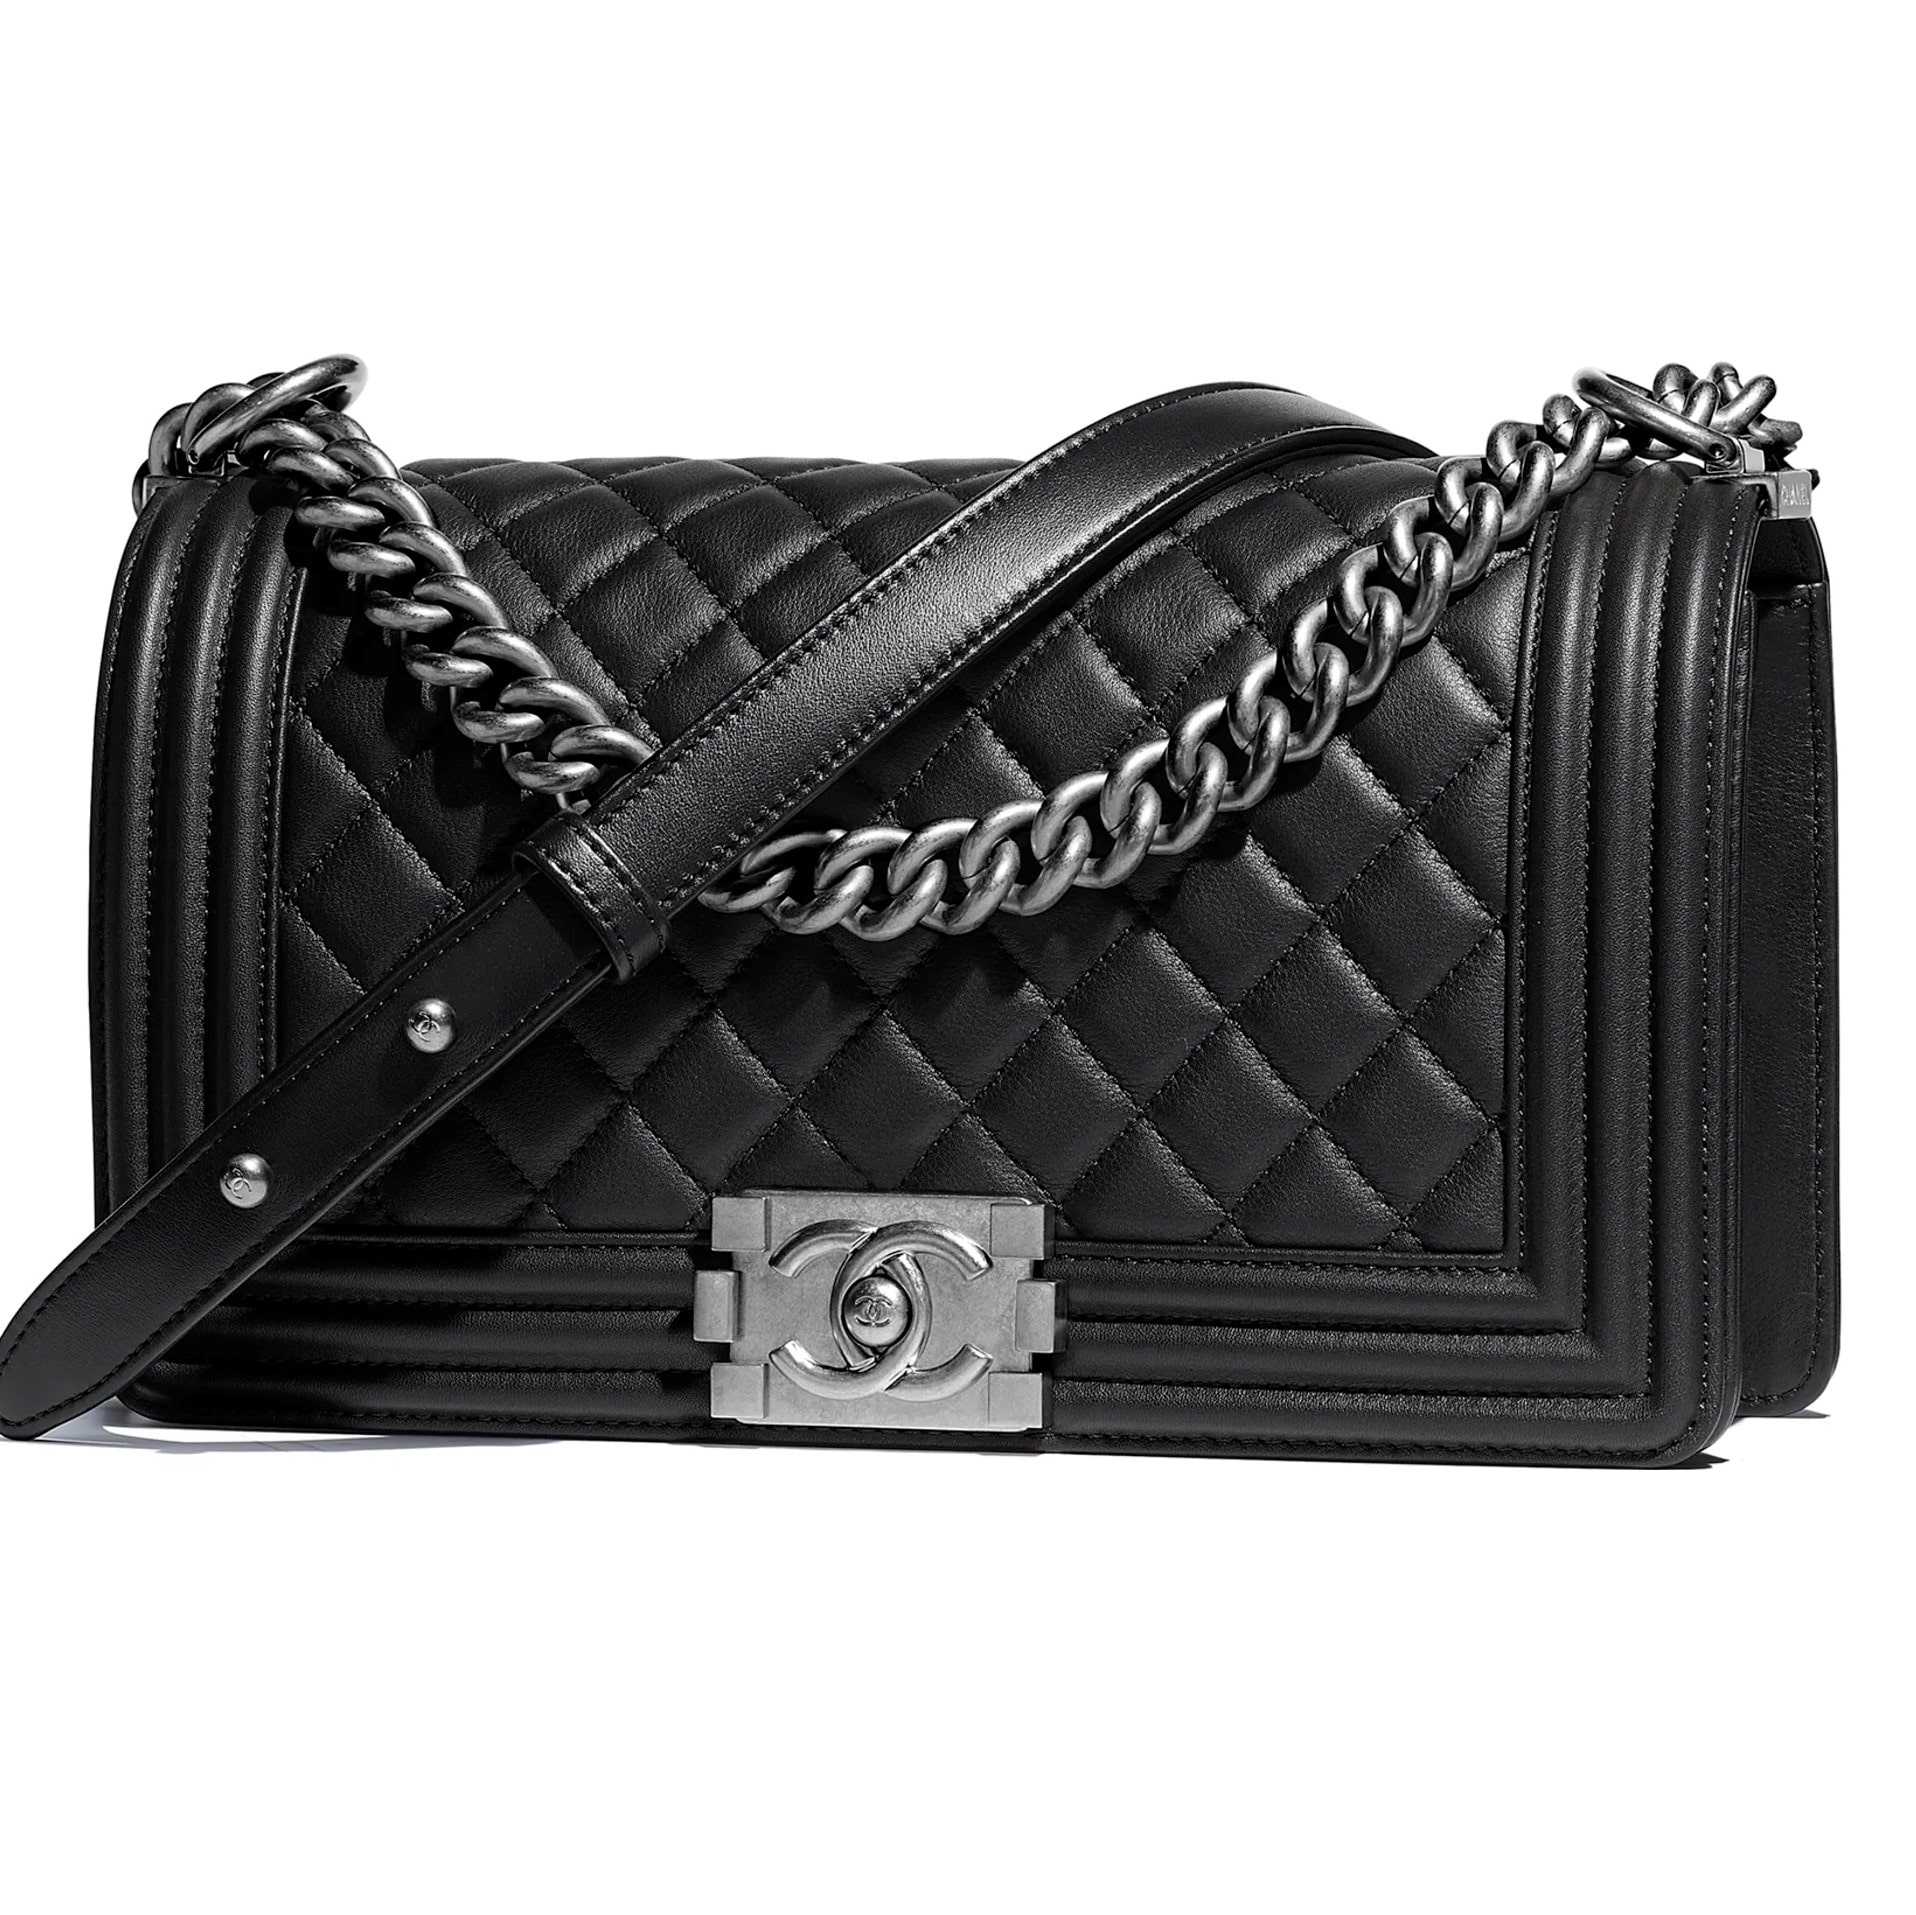 Chanel Black Quilted New Medium Boy Bag of Lambskin Leather with Antique  Gold Hardware  Handbags and Accessories Online  Ecommerce Retail   Sothebys